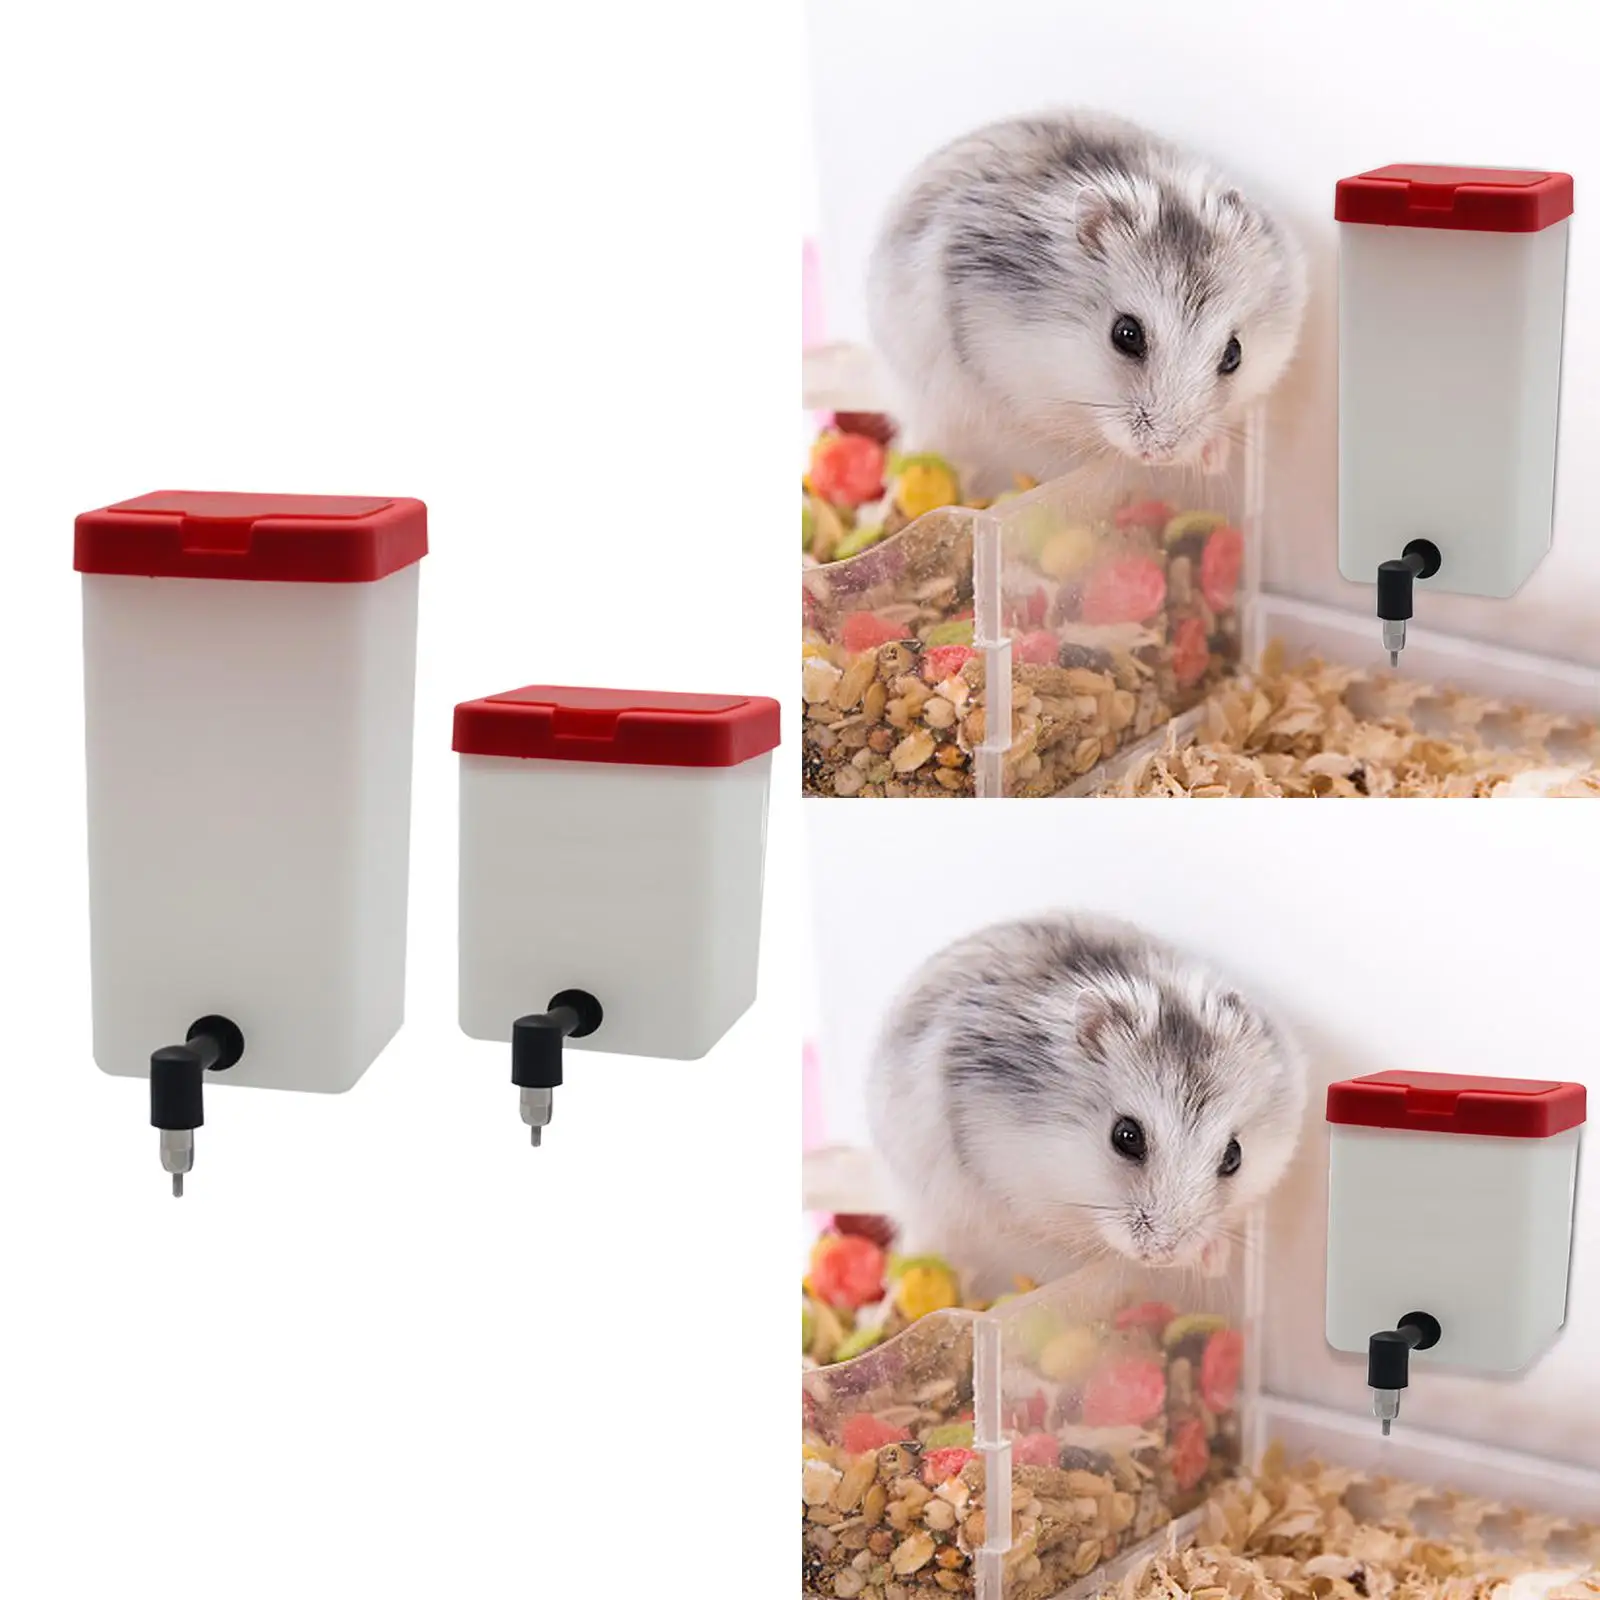 Portable Automatic Drinker Dispenser Drinking Bowl Water Feeder No Drip for Rabbit Small Animal Guinea Chicken Ferret